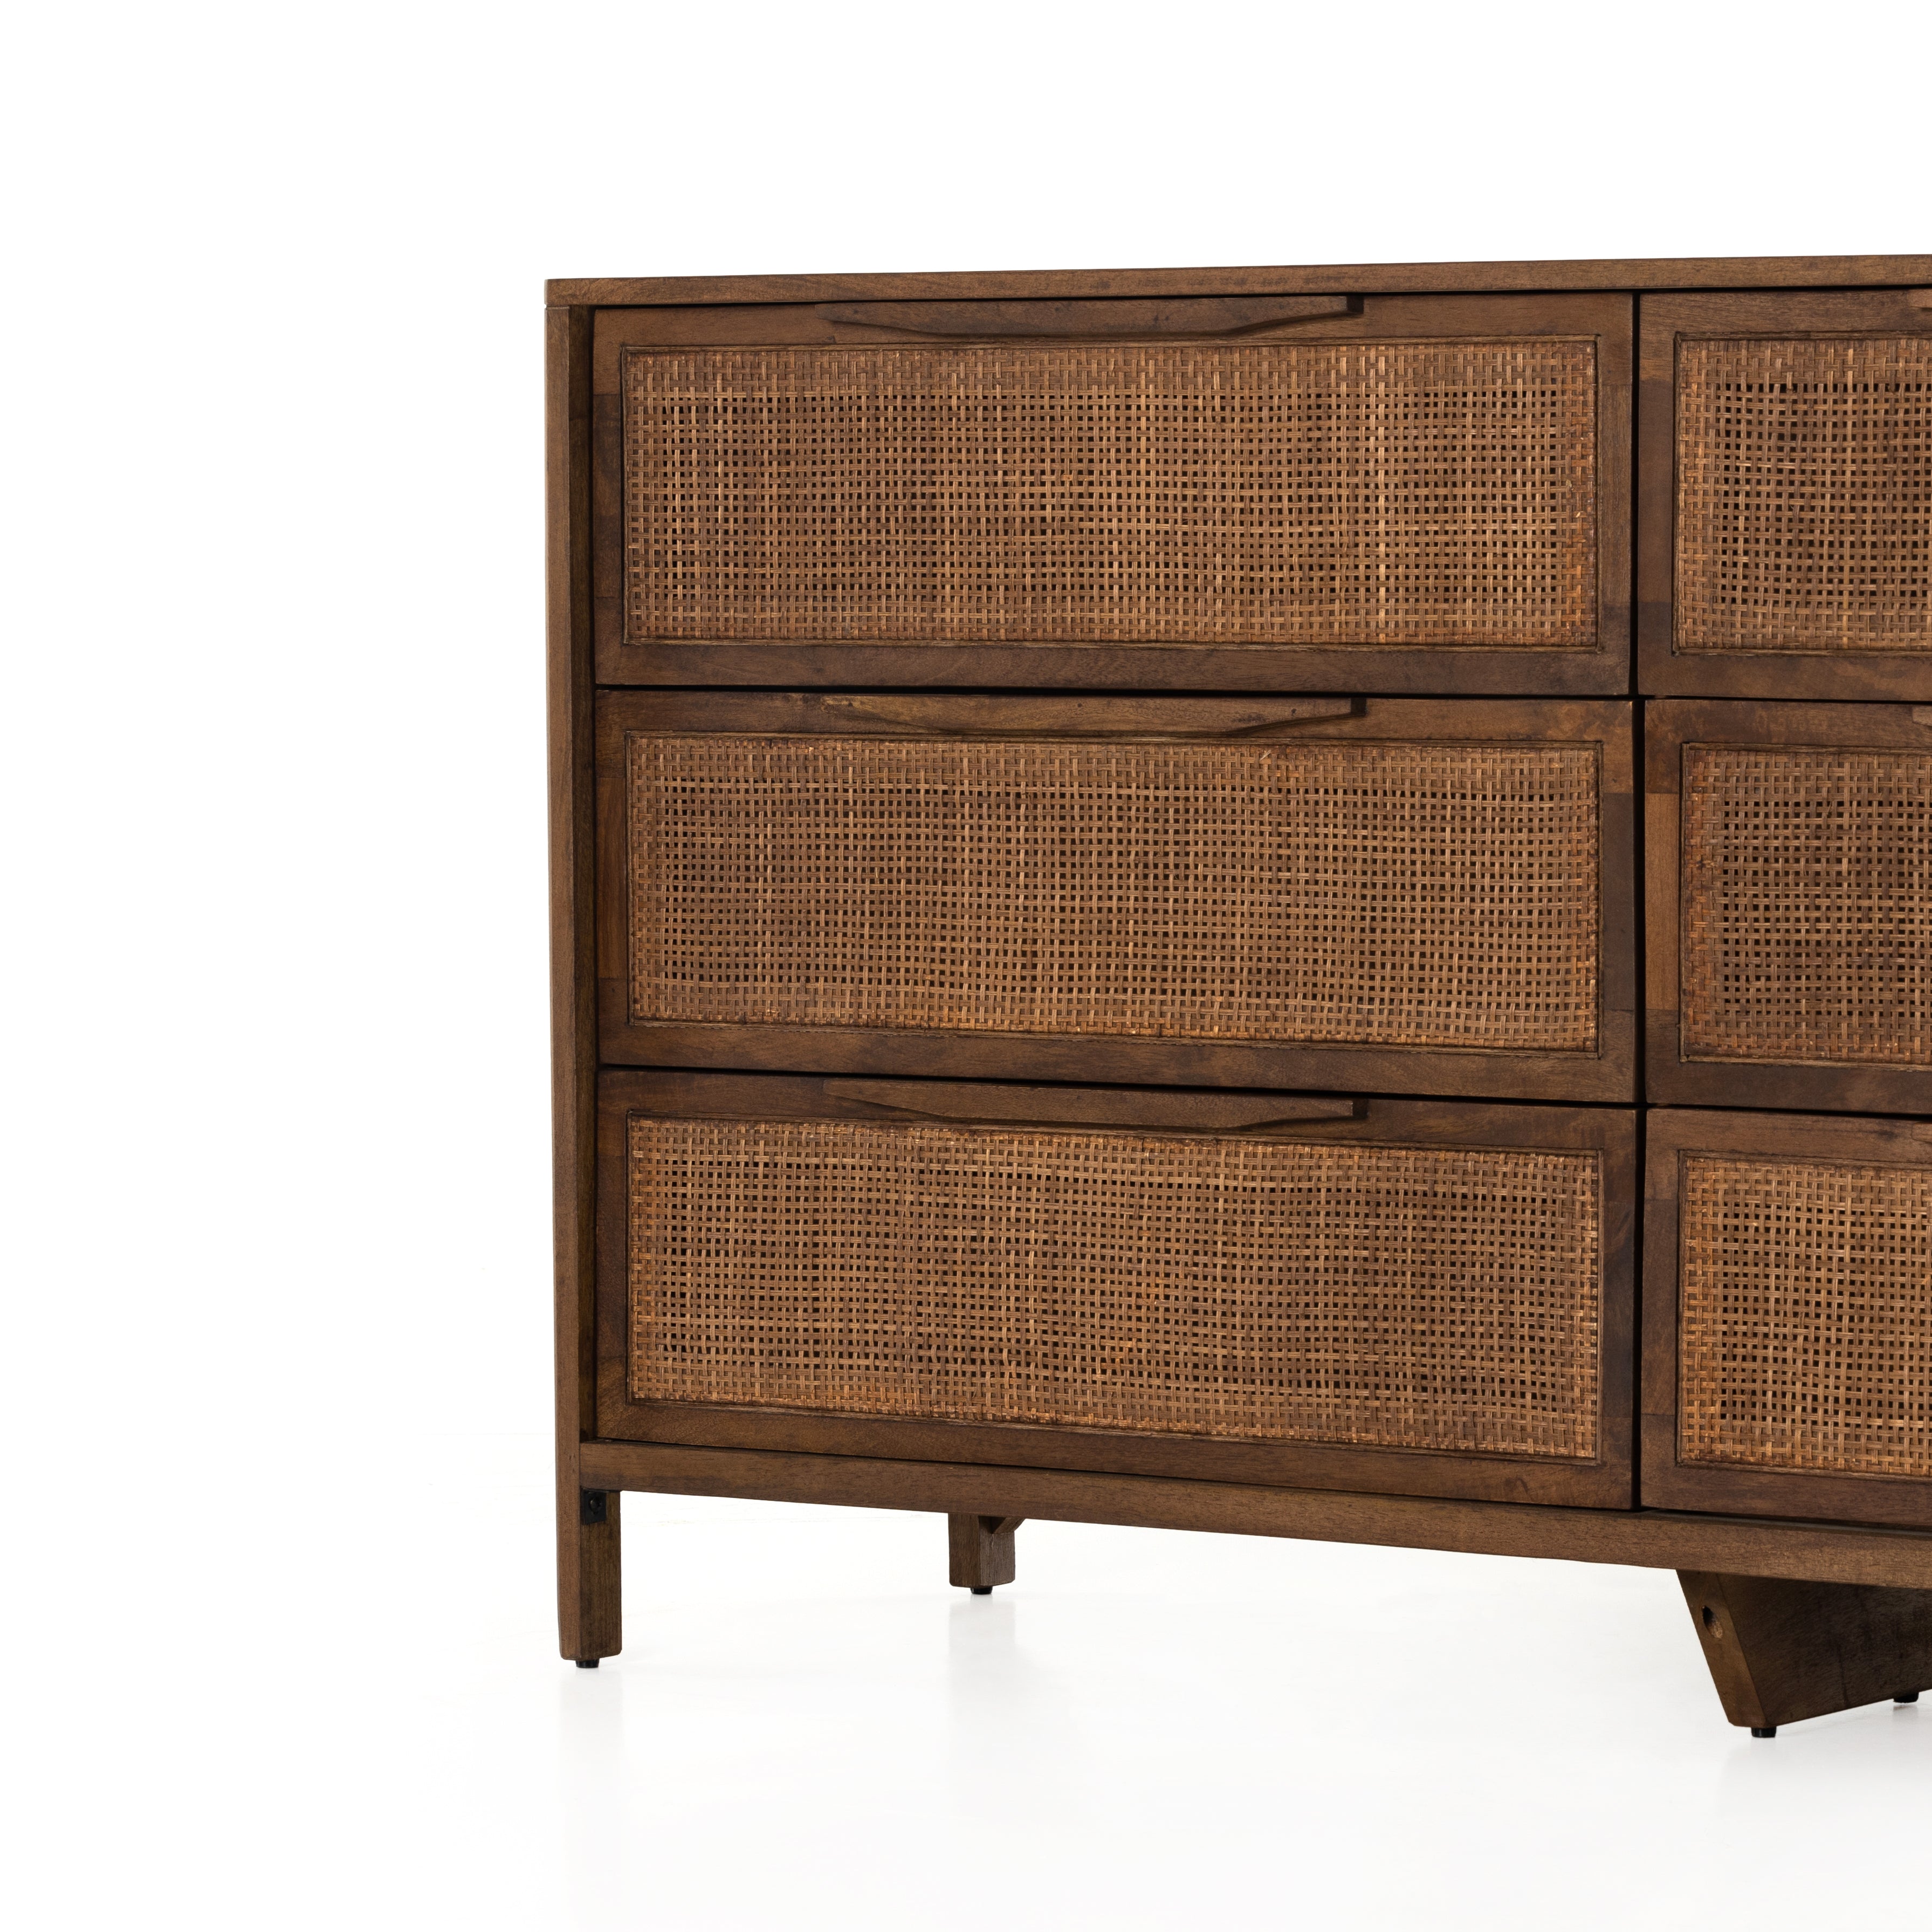 Sydney Brown Wash Drawer Dresser encases six spacious drawers of woven cane, for a textural look with monochromatic vibes. Amethyst Home provides interior design services, furniture, rugs, and lighting in the Calabasas metro area.